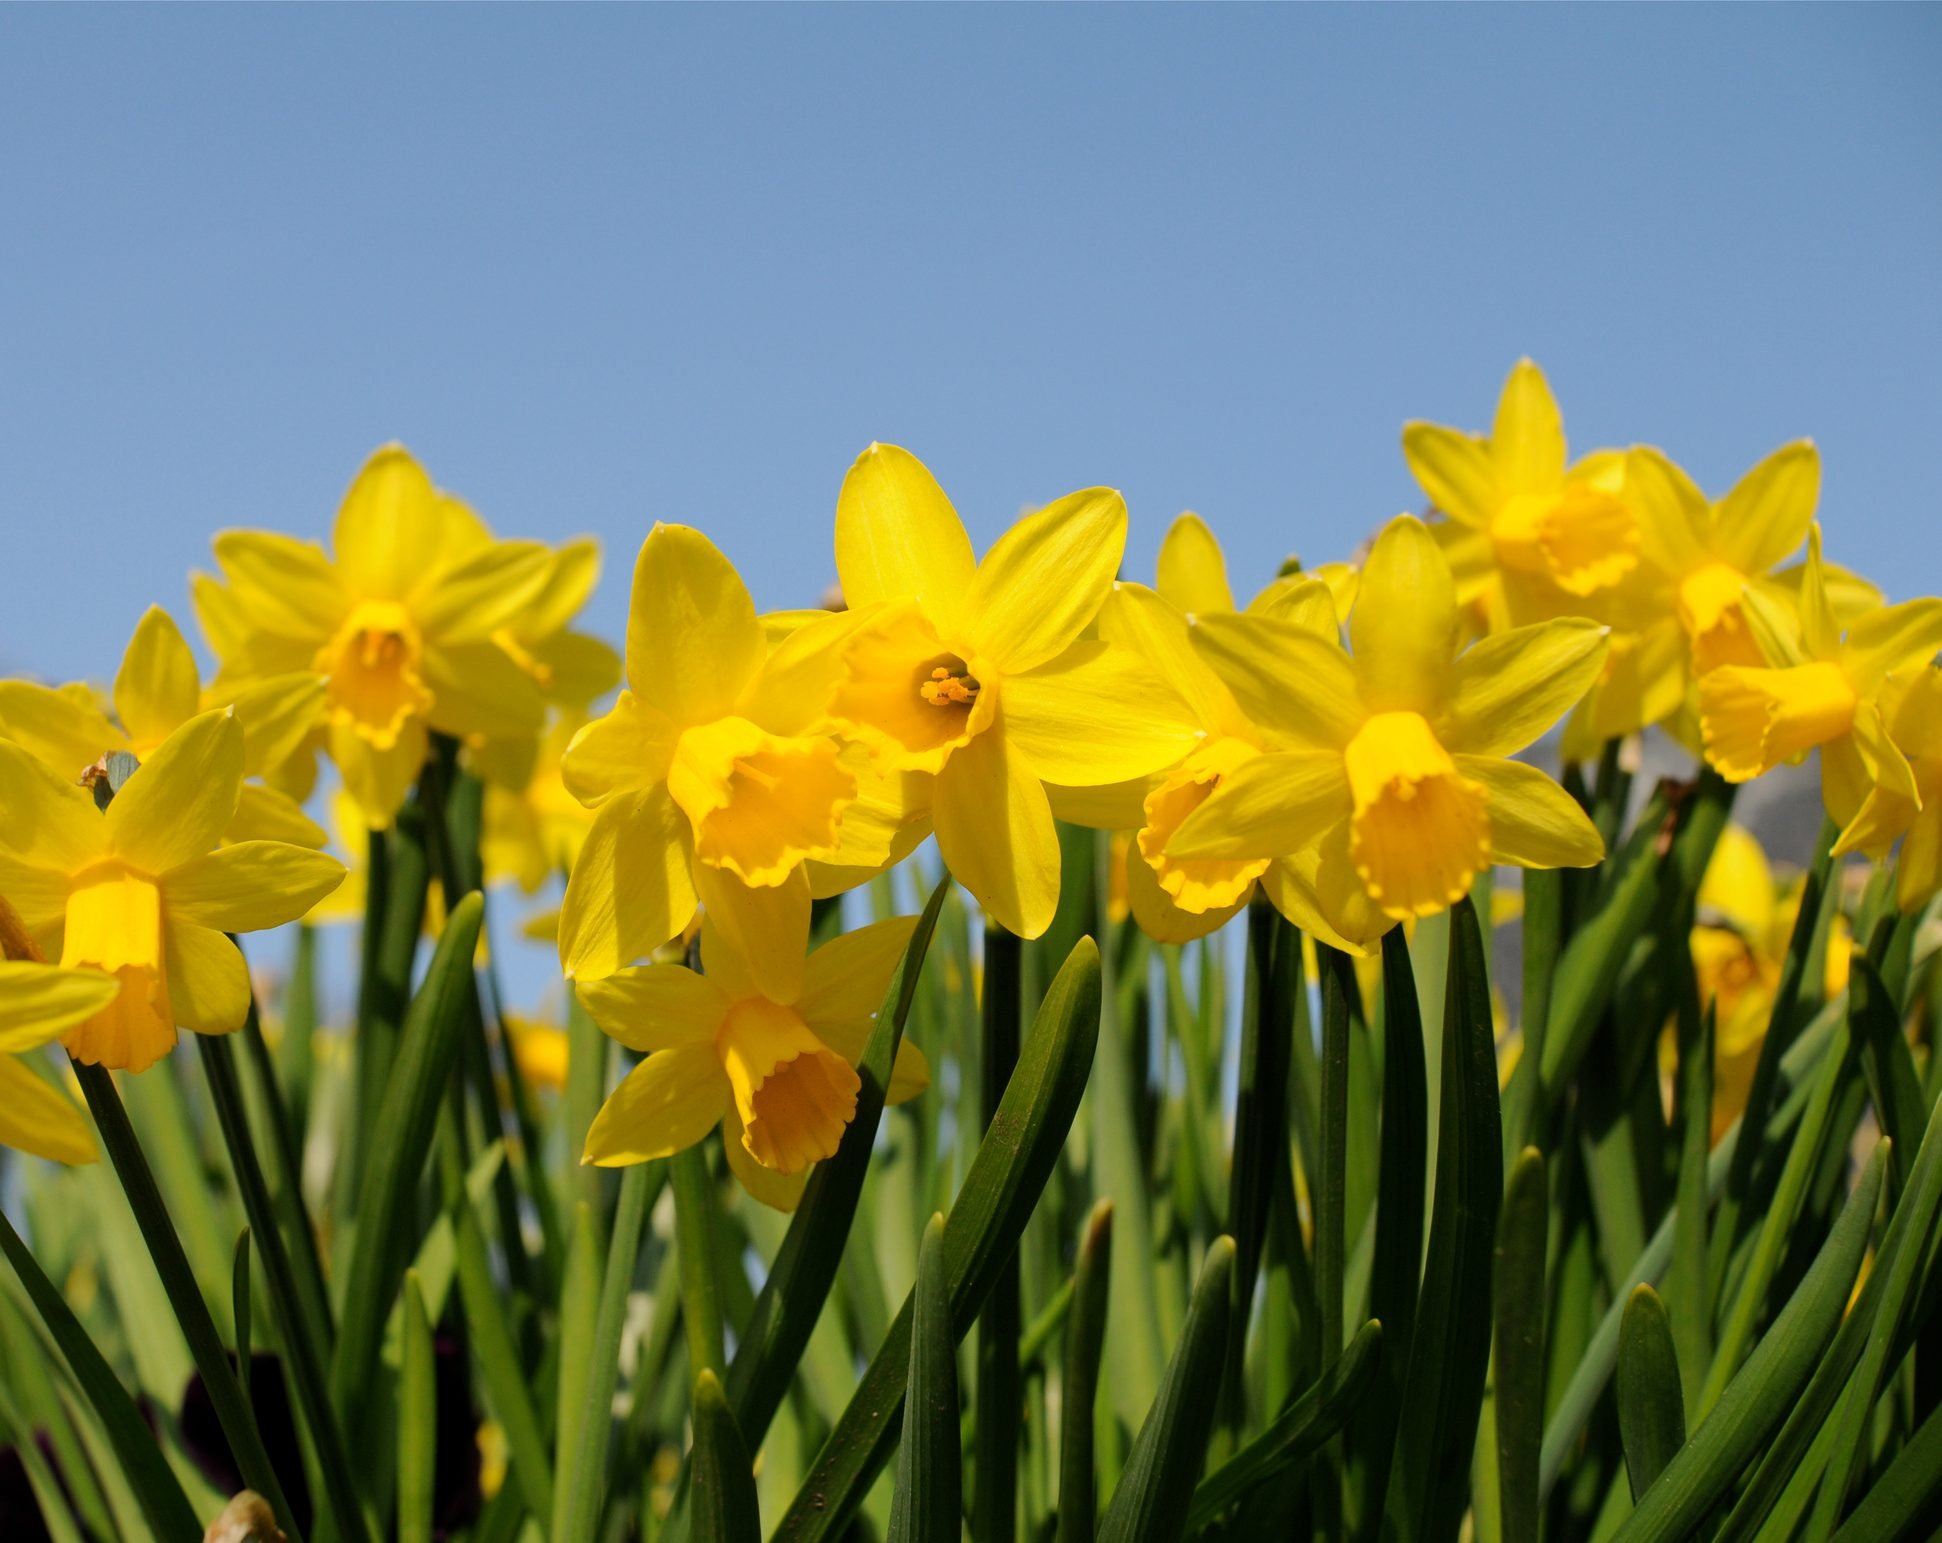 Daffodils Not Blooming? Here's What to Do